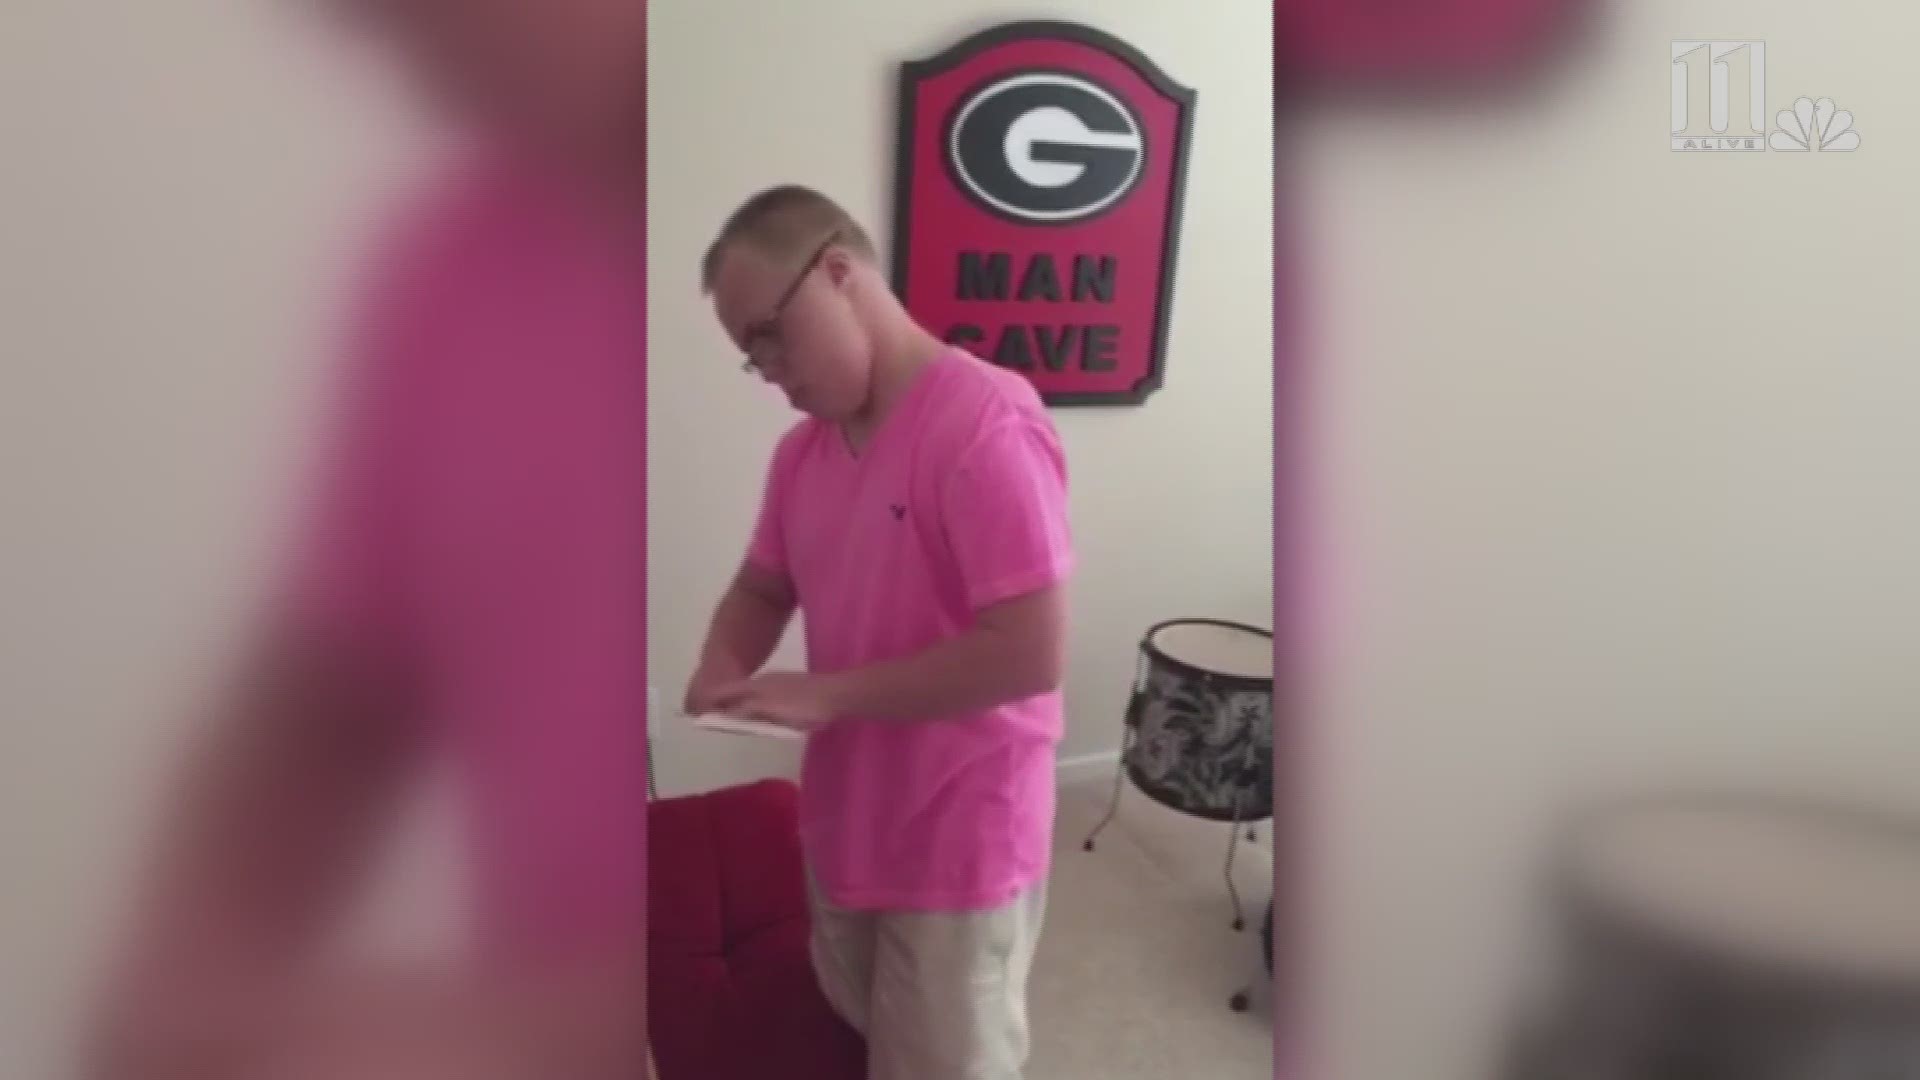 Jordan Huffman finds out he's been accepted to UGA